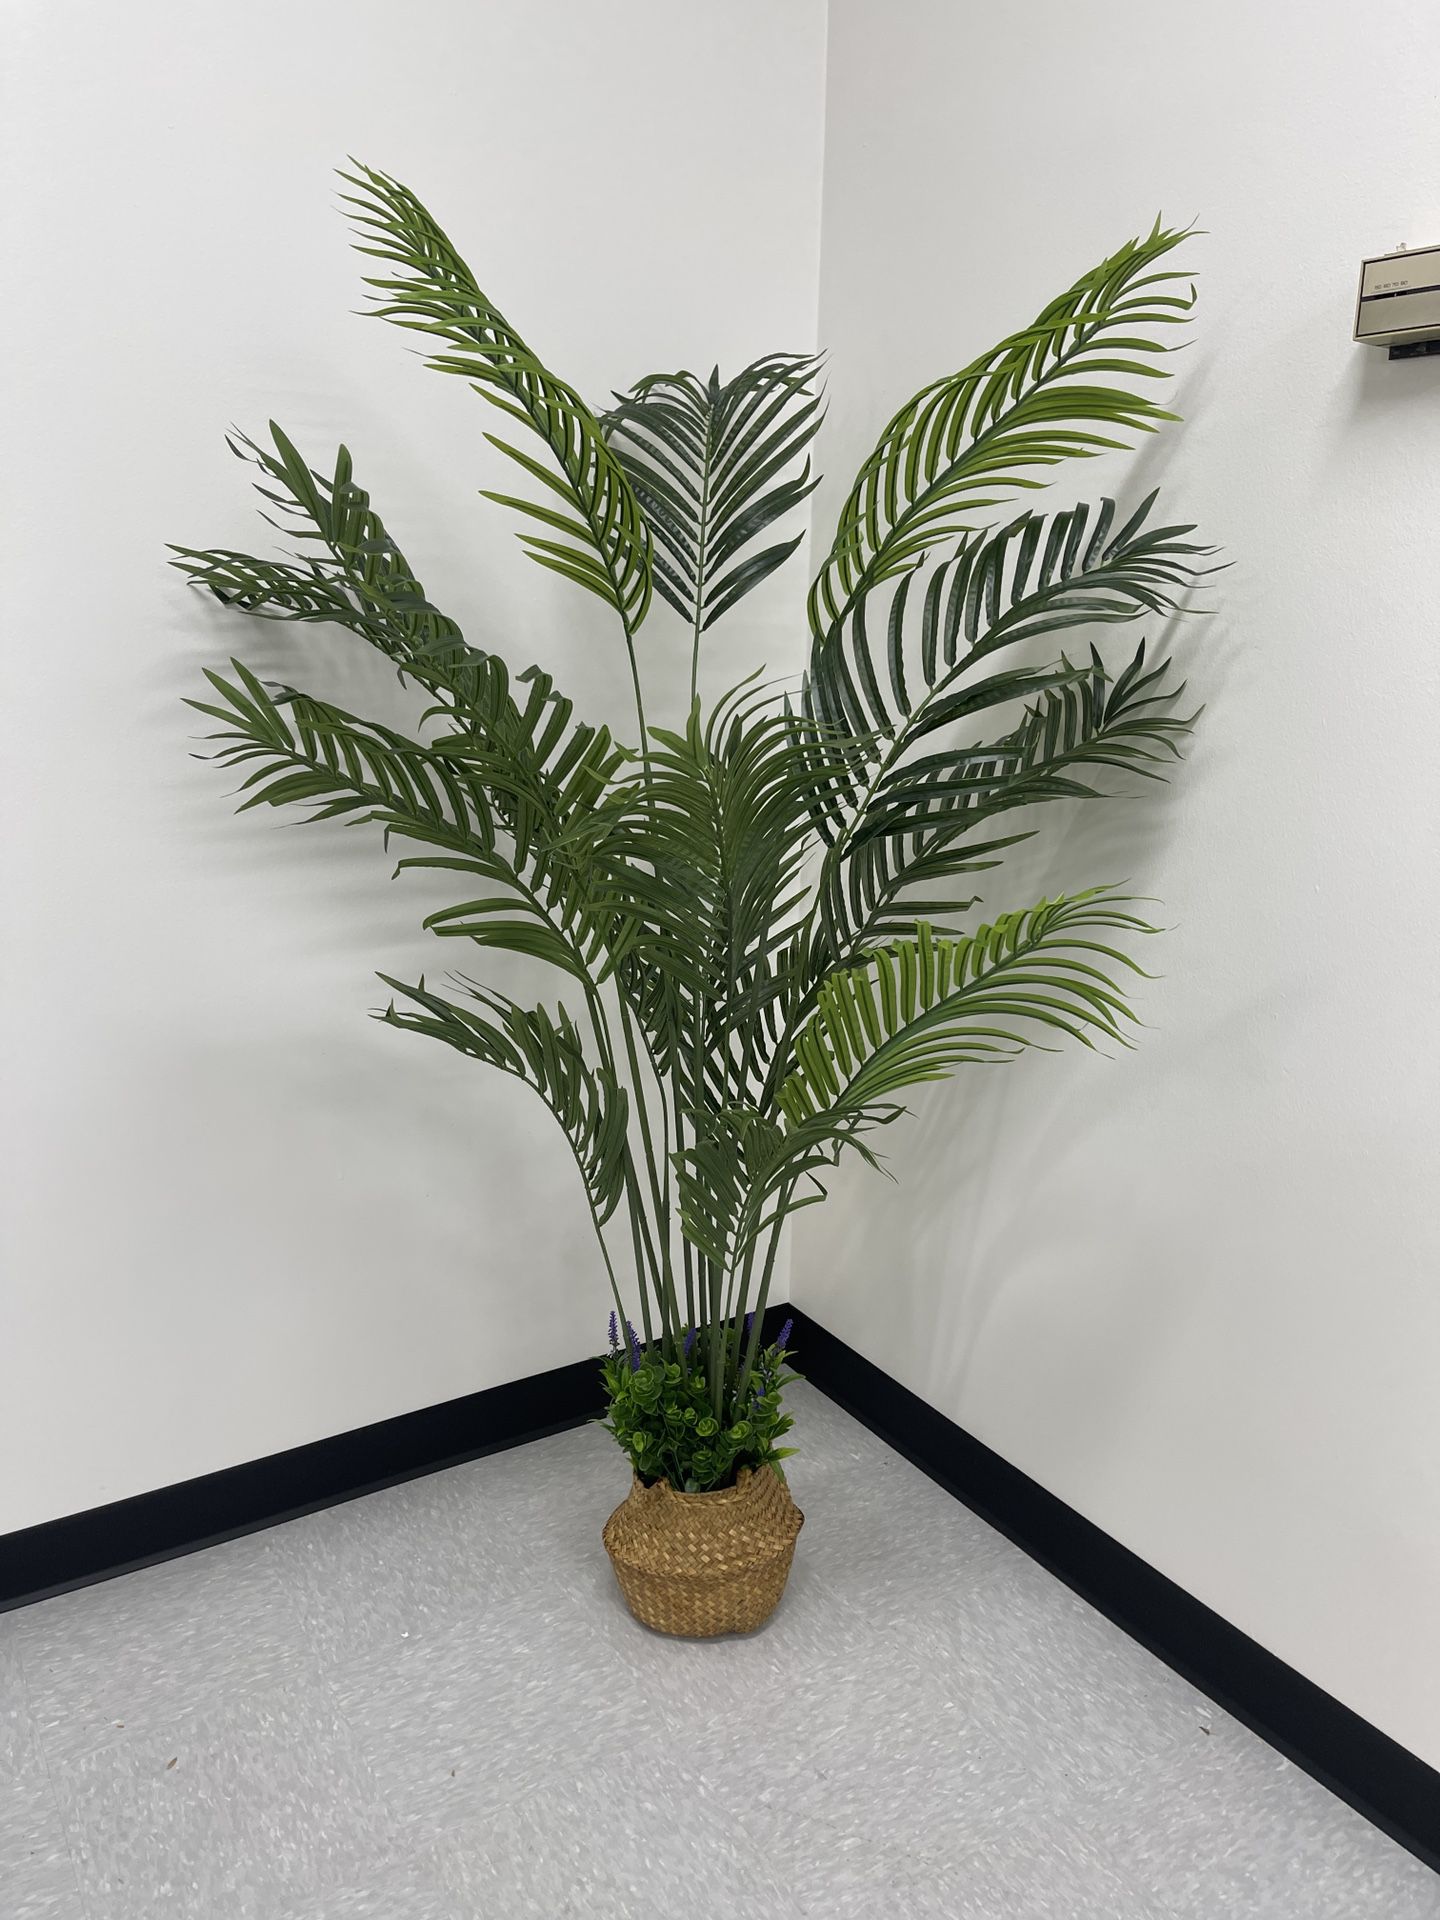 Artificial Areca Palm Tree 5Feet Fake Tropical Palm Plant and Handmade Seagrass Basket, Perfect Tall Faux Dypsis Lutescens Plants for Entryway Modern 